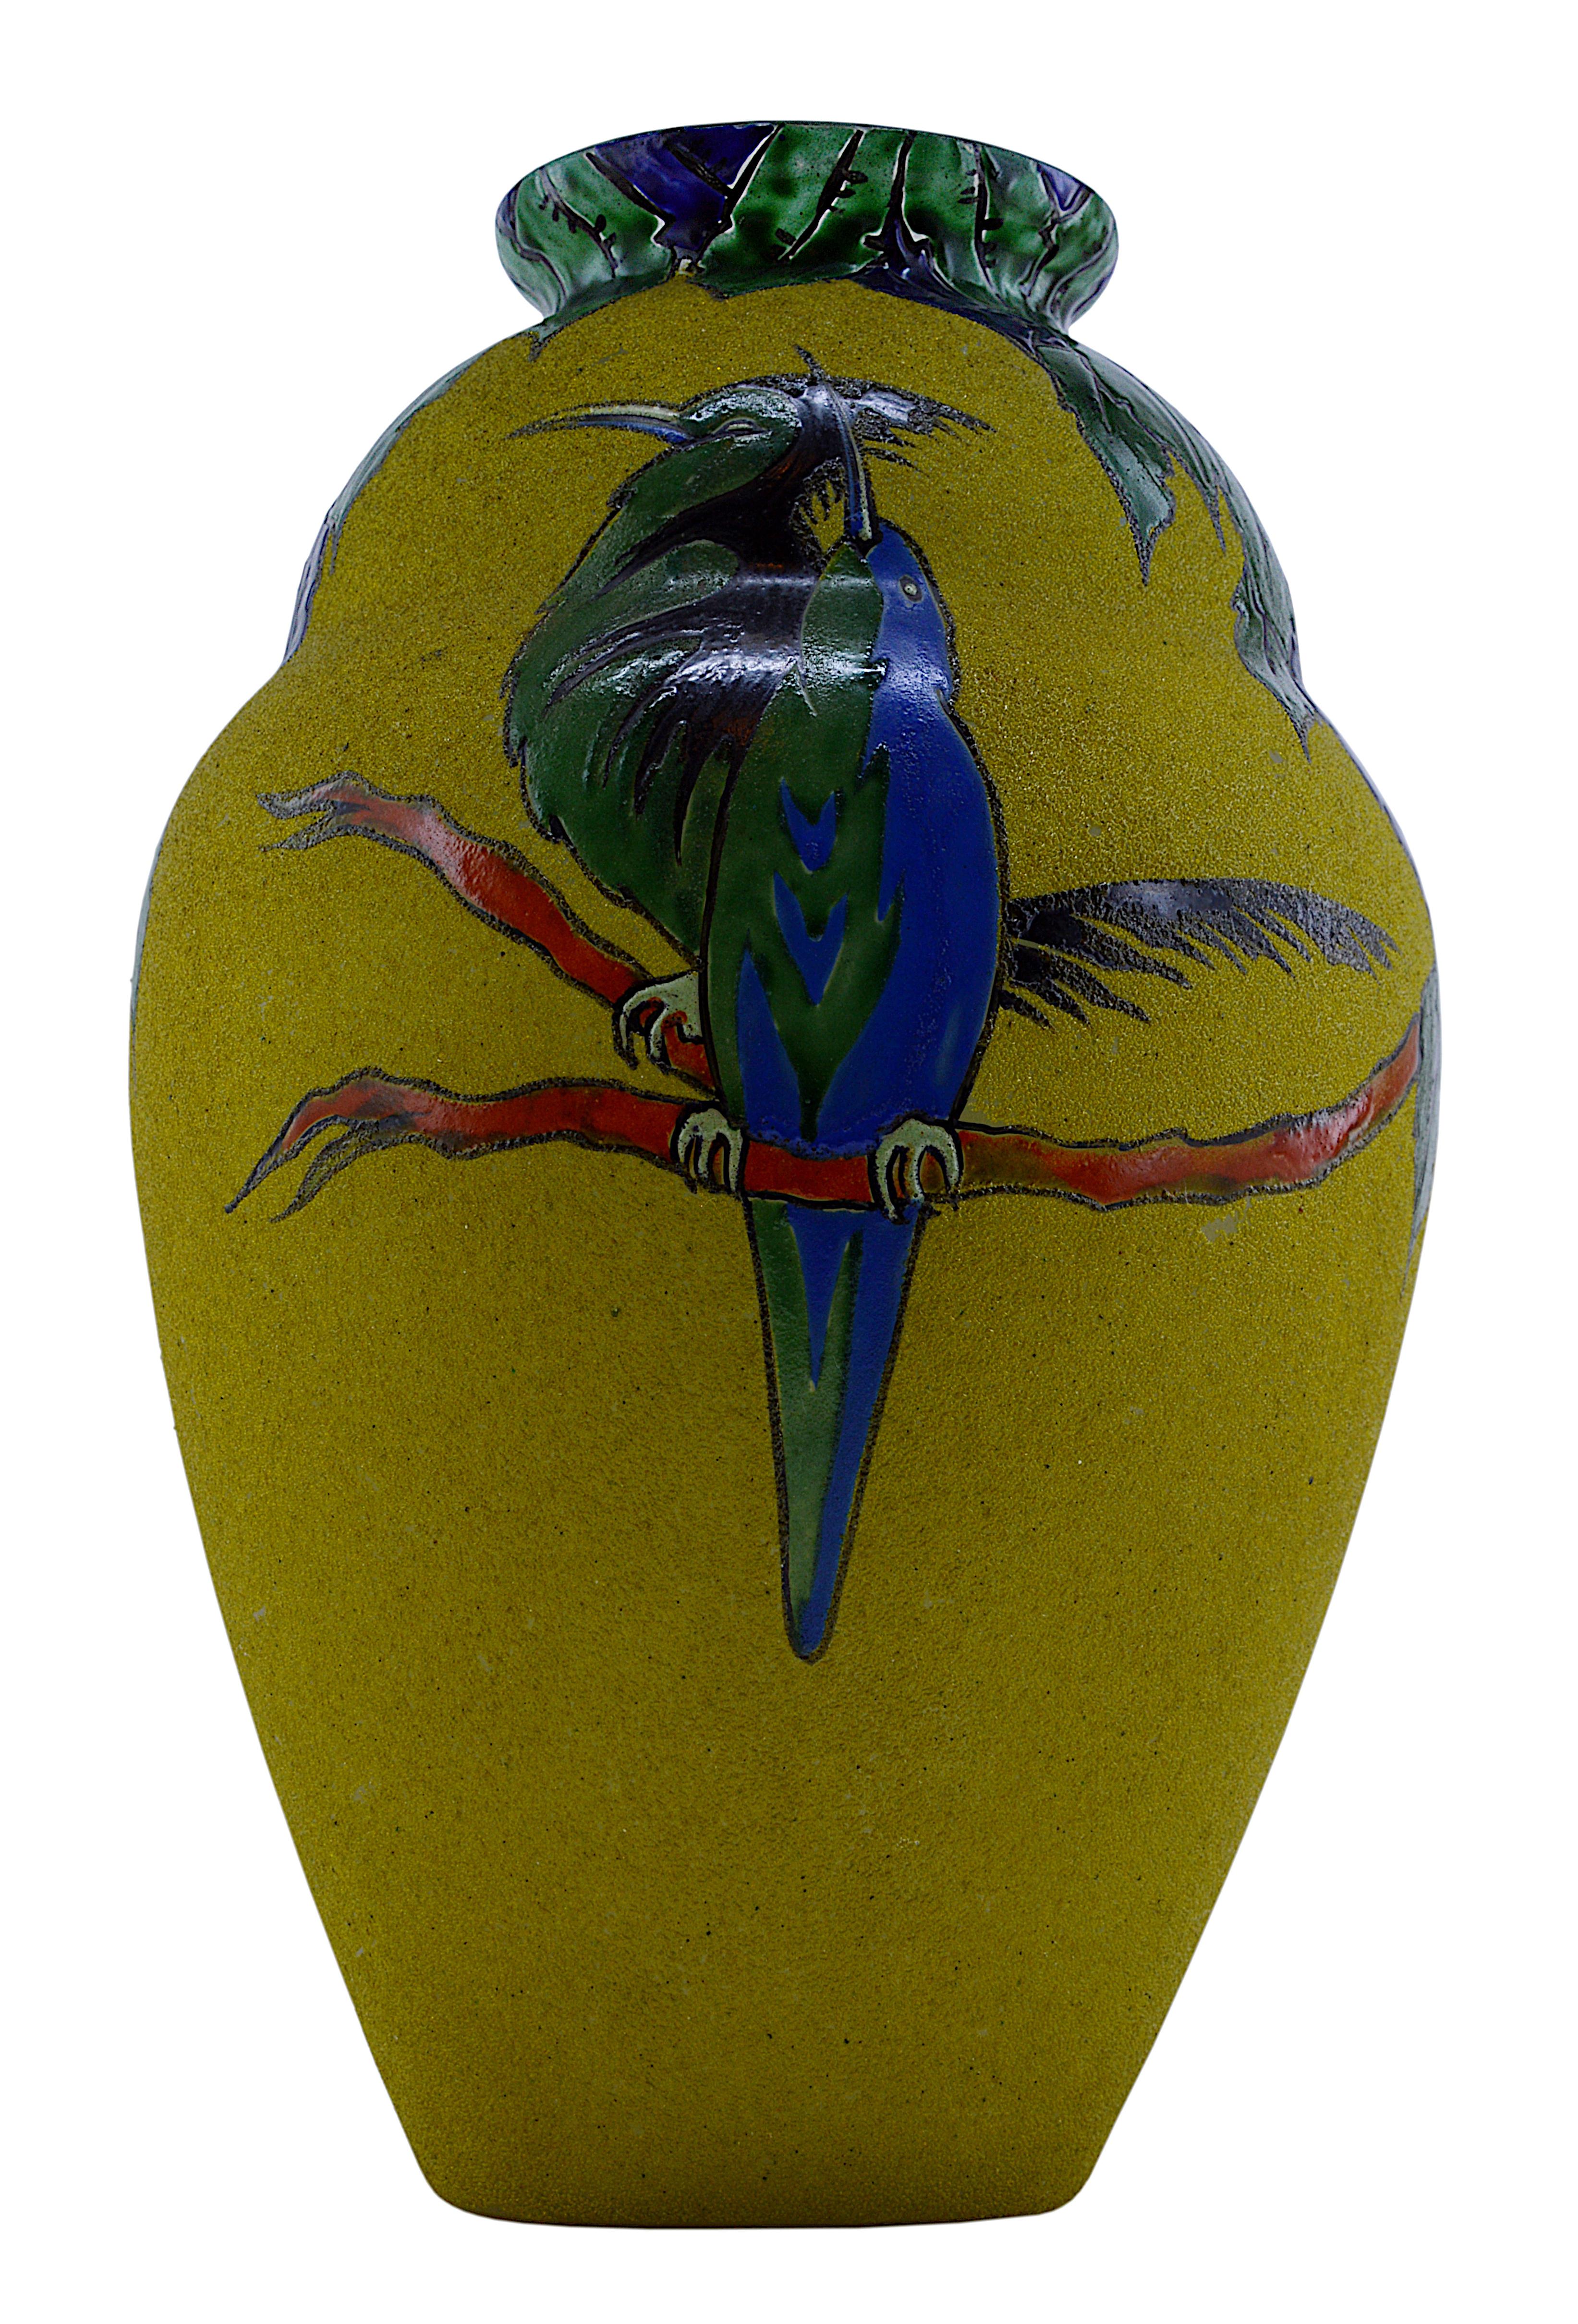 French Art Deco pendant by LEUNE, 28bis rue du Cardinal Lemoine, Paris, France, 1920s. Granite glass vase with enameled pattern. Two birds in a tree. Measures: Height 9.8